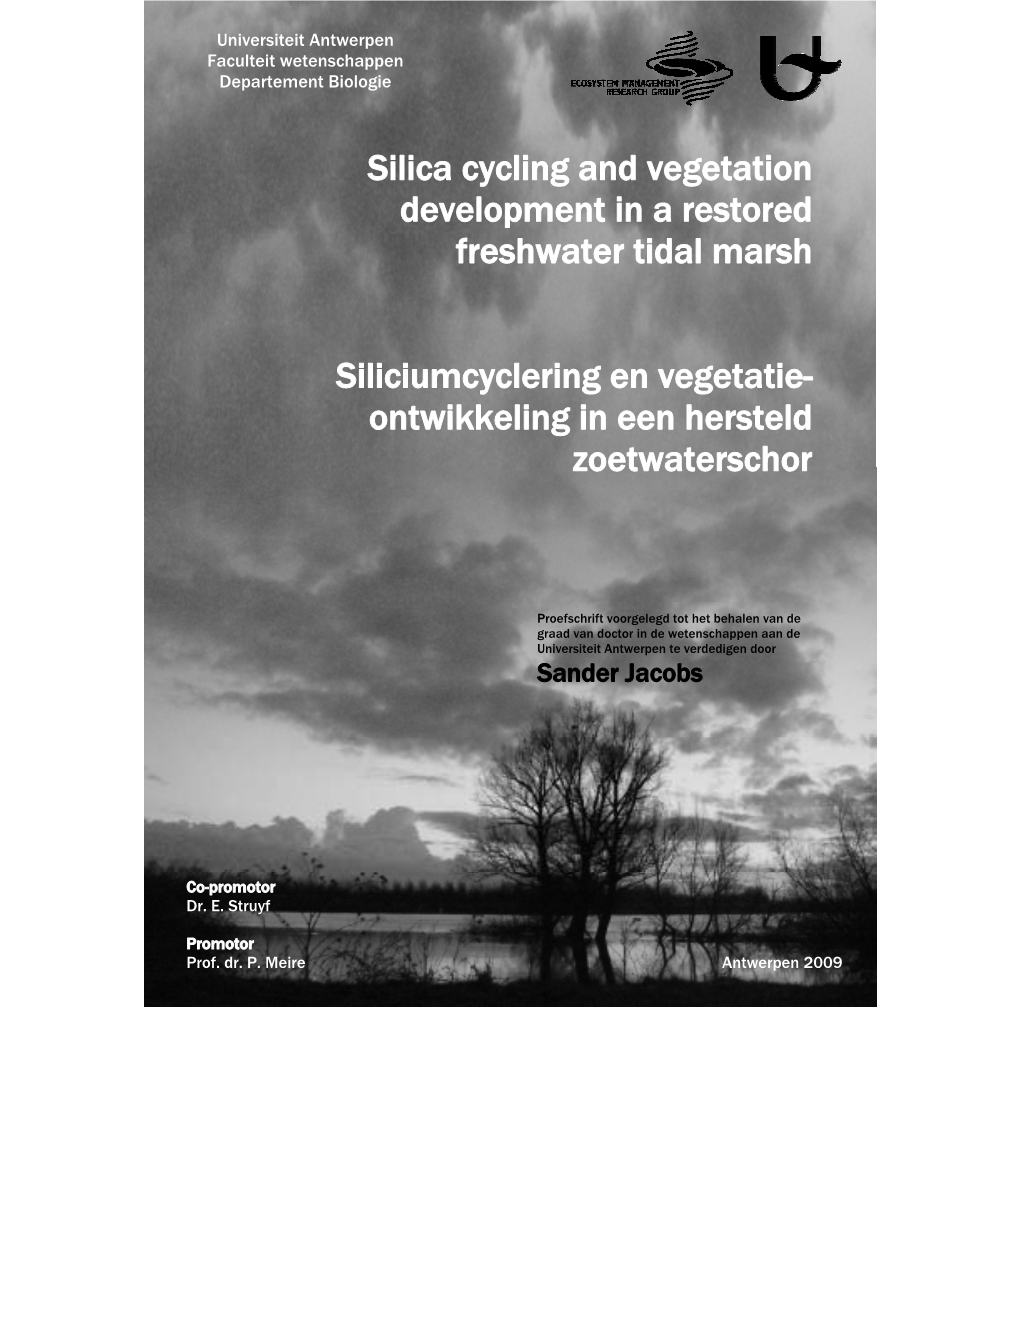 Silica Cycling and Vegetation Development in a Restored Freshwater Tidal Marsh